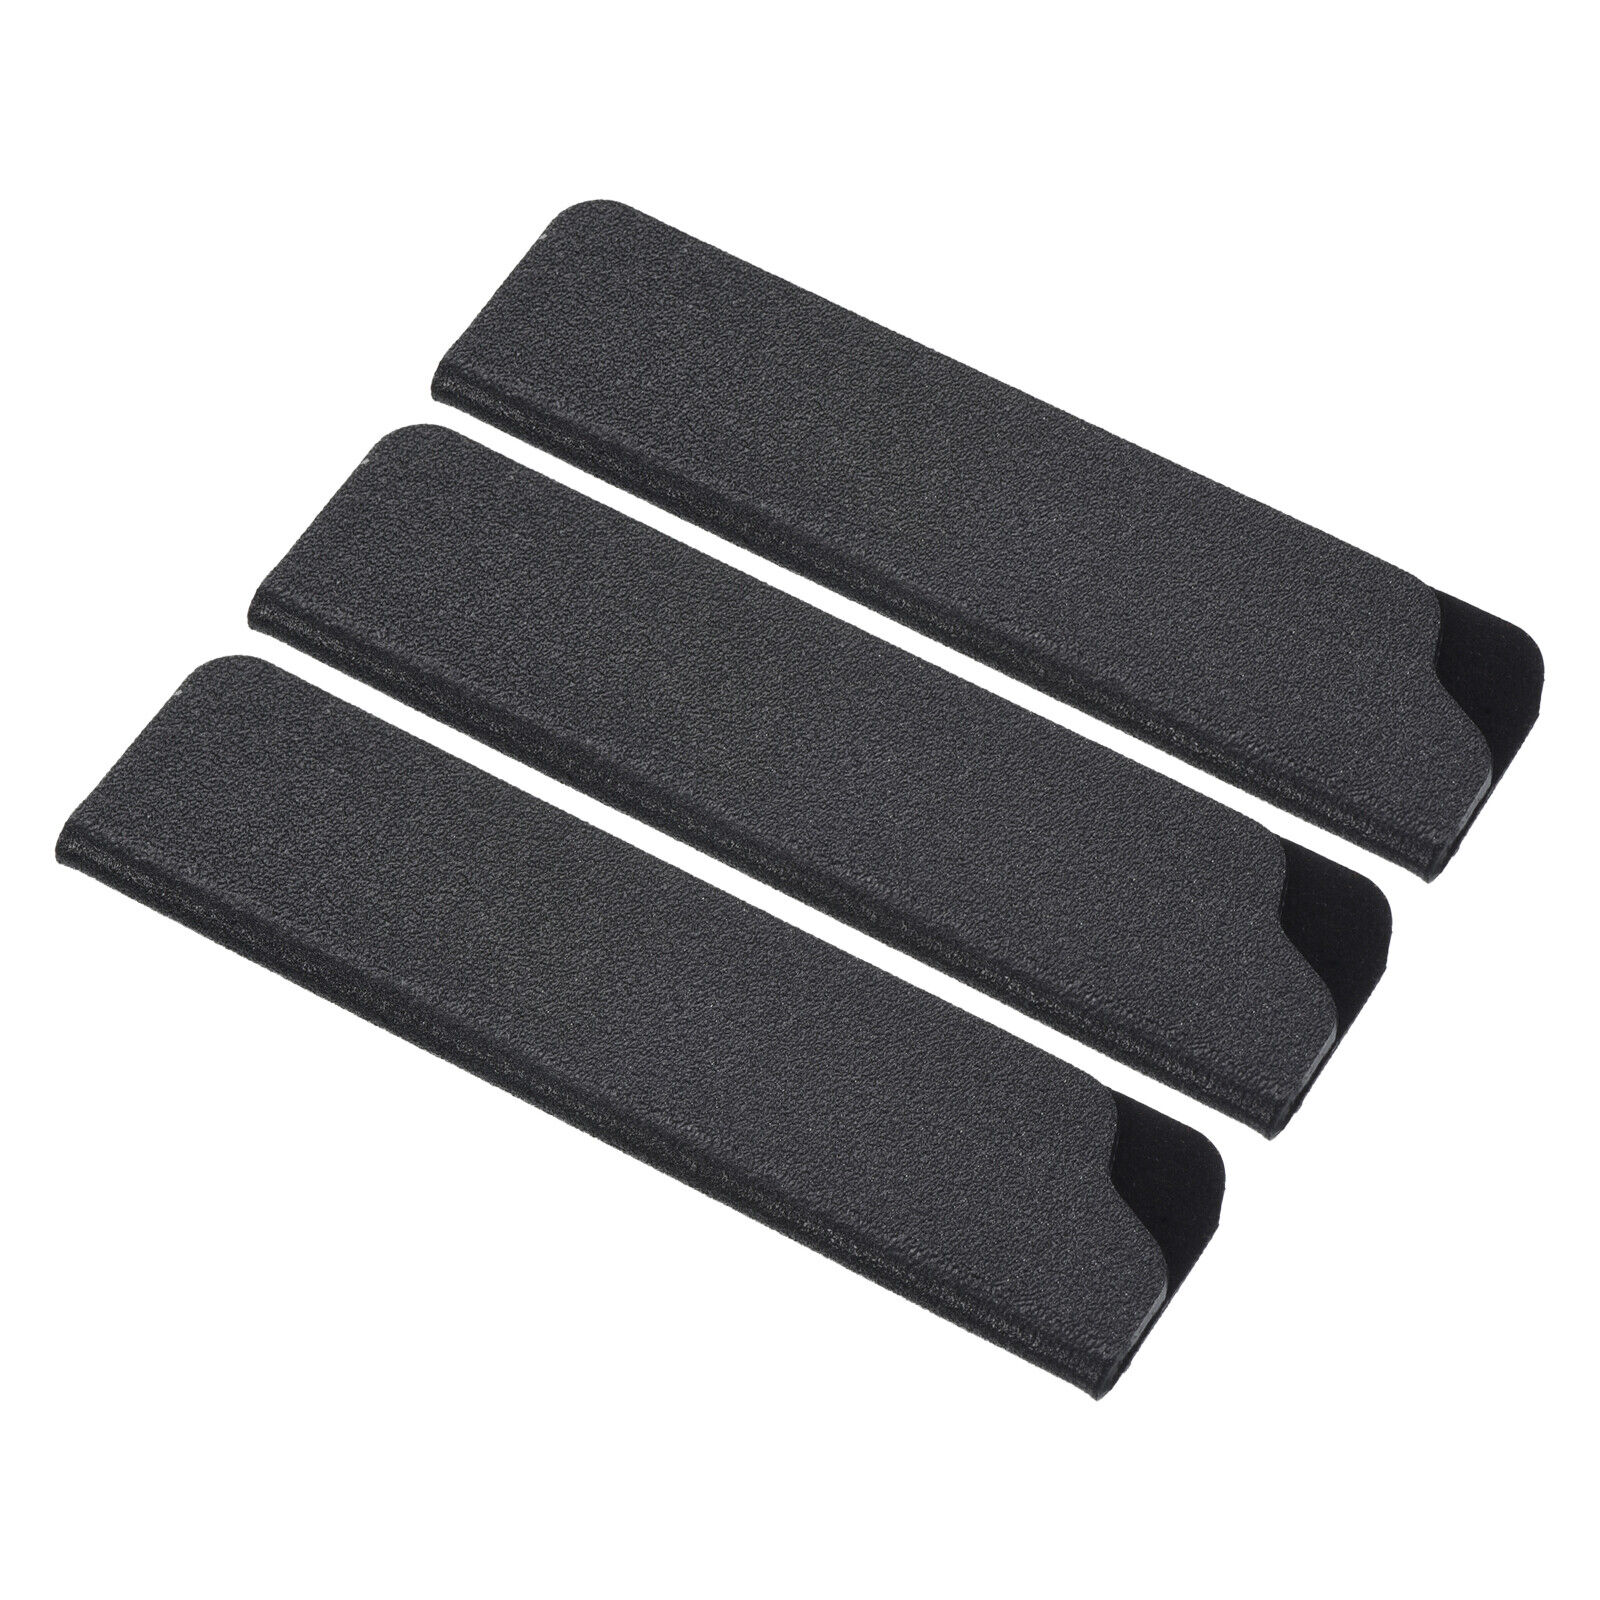 3pcs ABS Knife Cover Sleeves Edge Guard Blade Protector for 3.5\